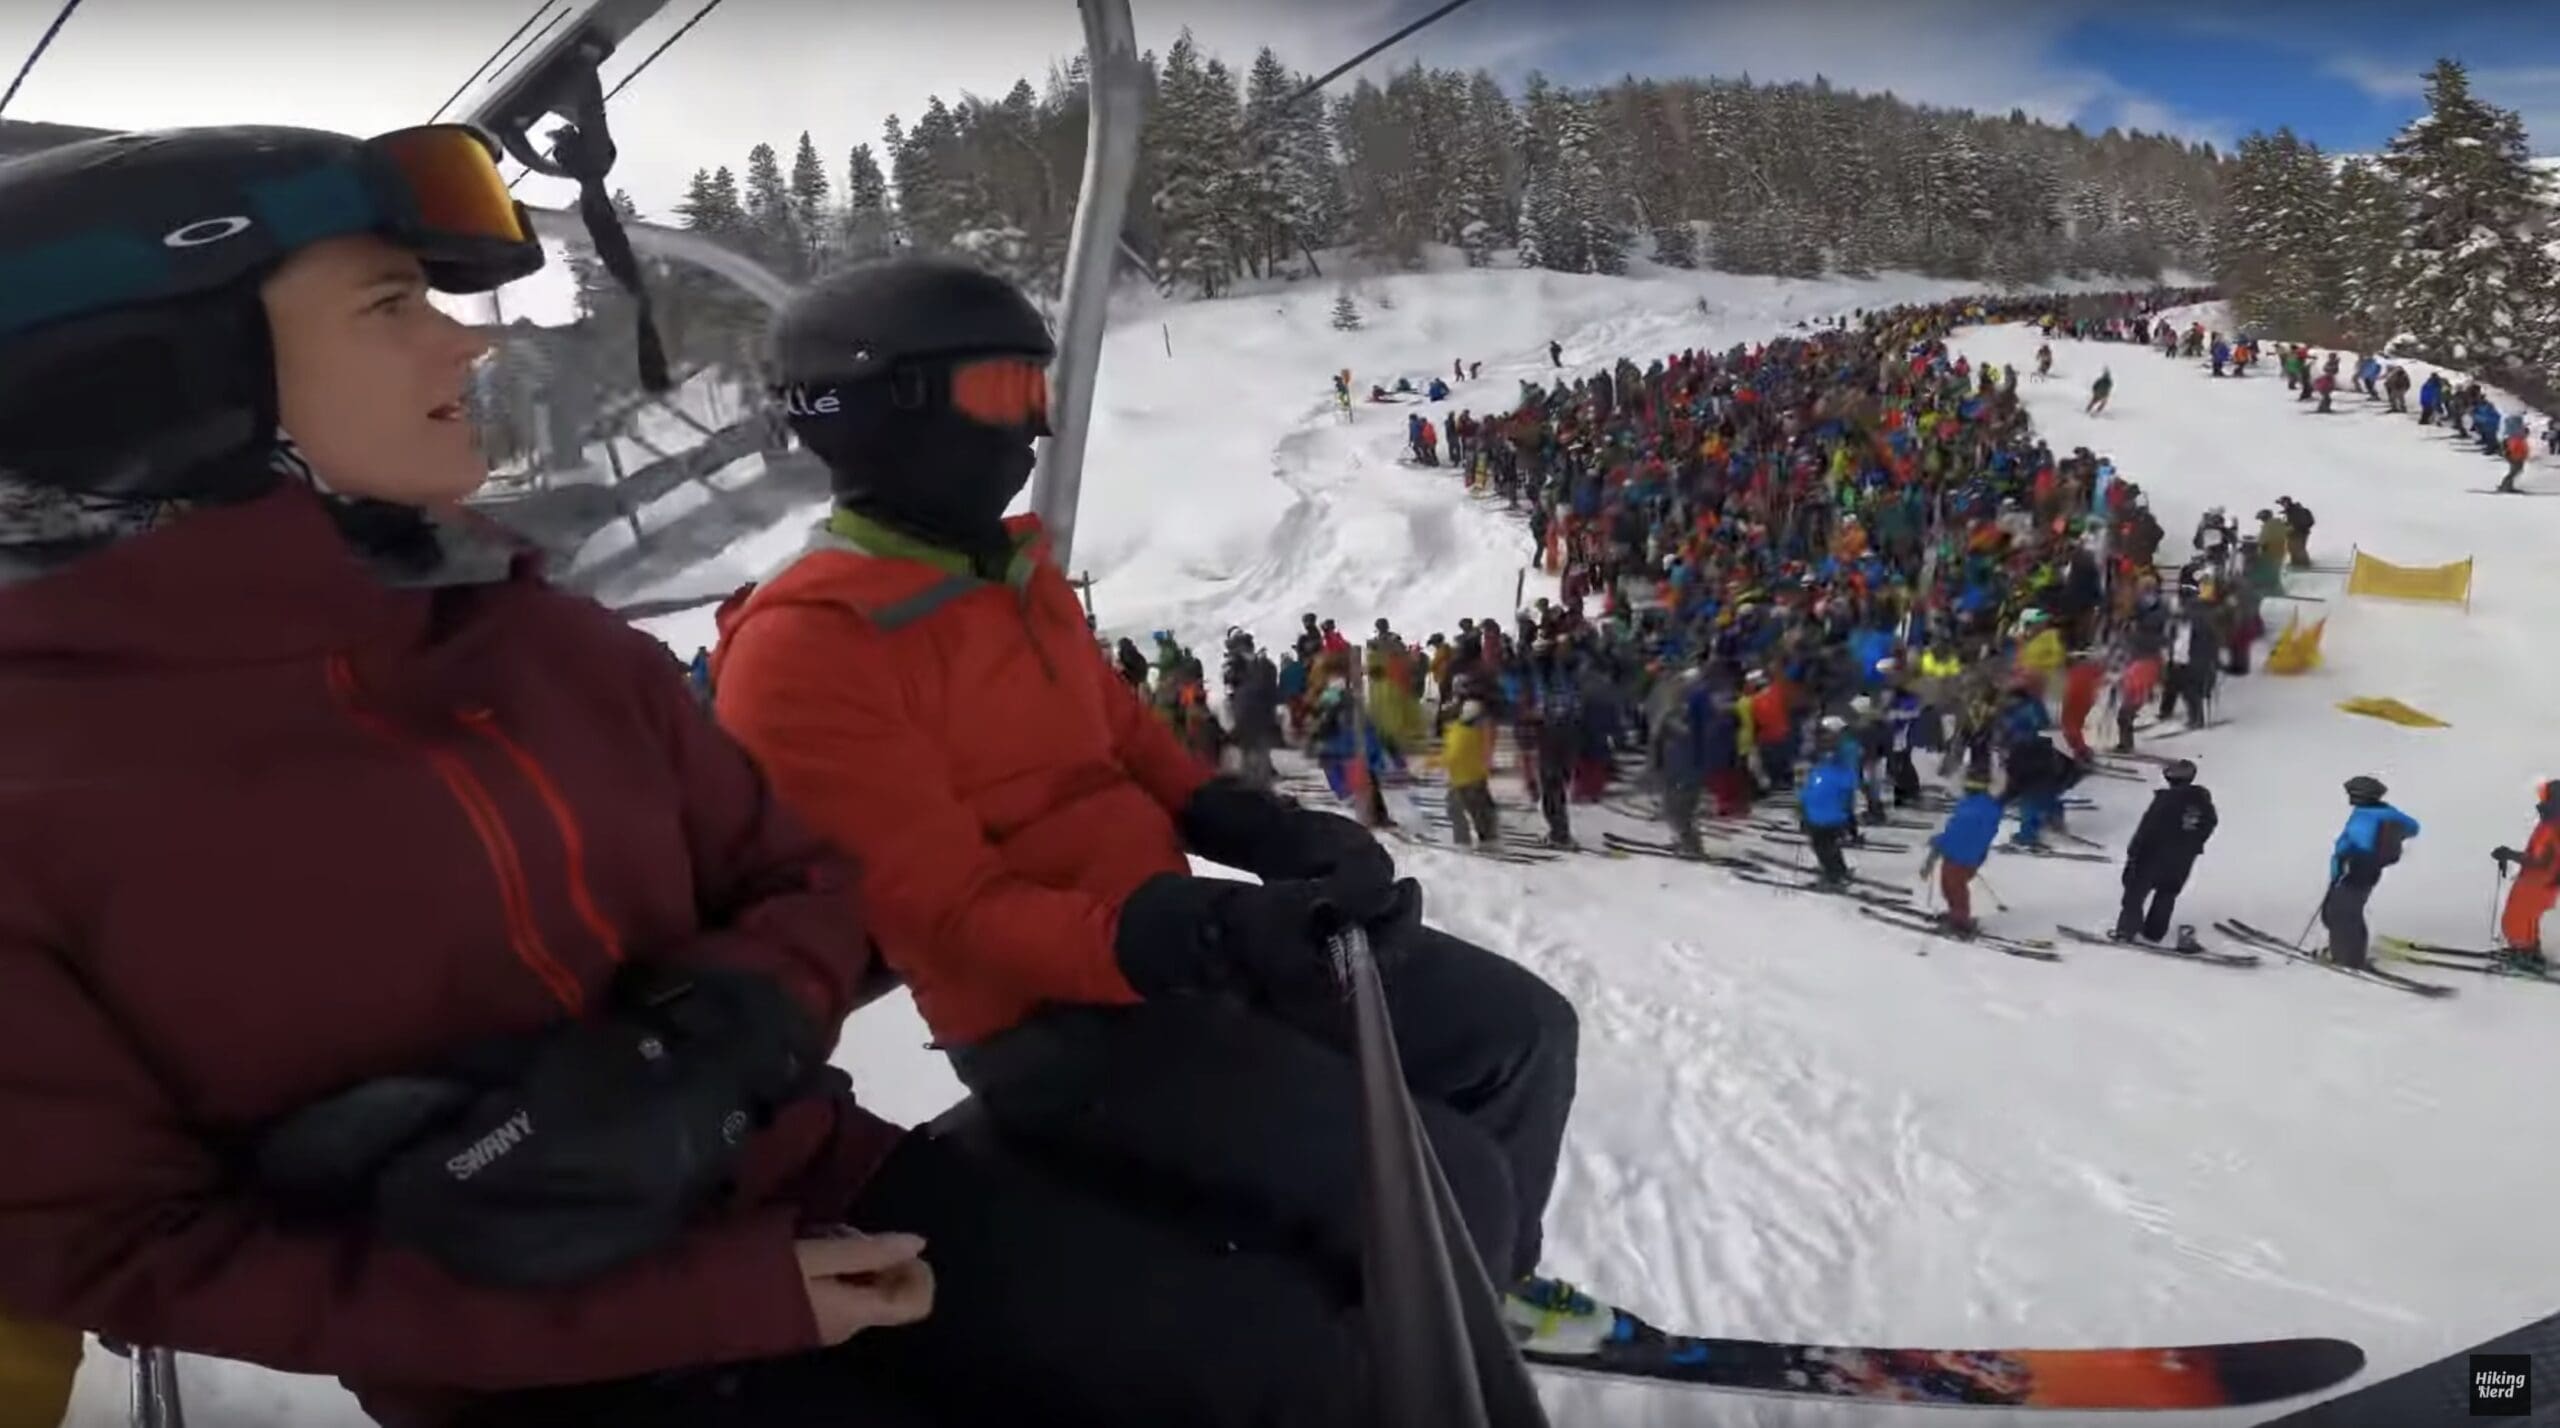 This Video Really Puts Vail’s EPIC Lift Lines Into Perspective